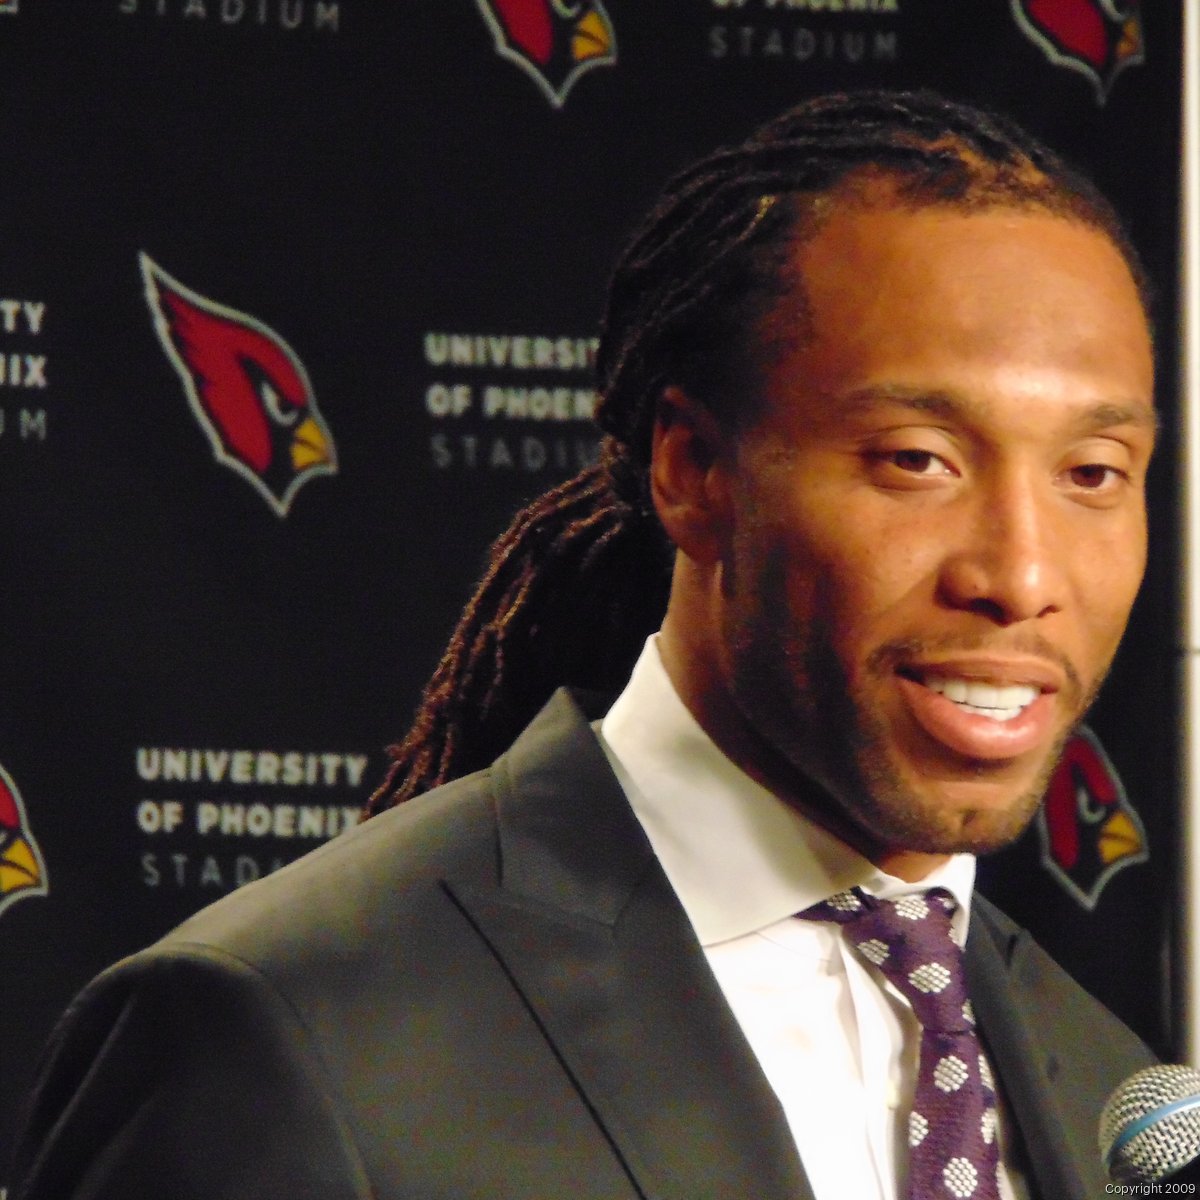 Ex-Cardinal Larry Fitzgerald is in a Hall of Fame as of last weekend